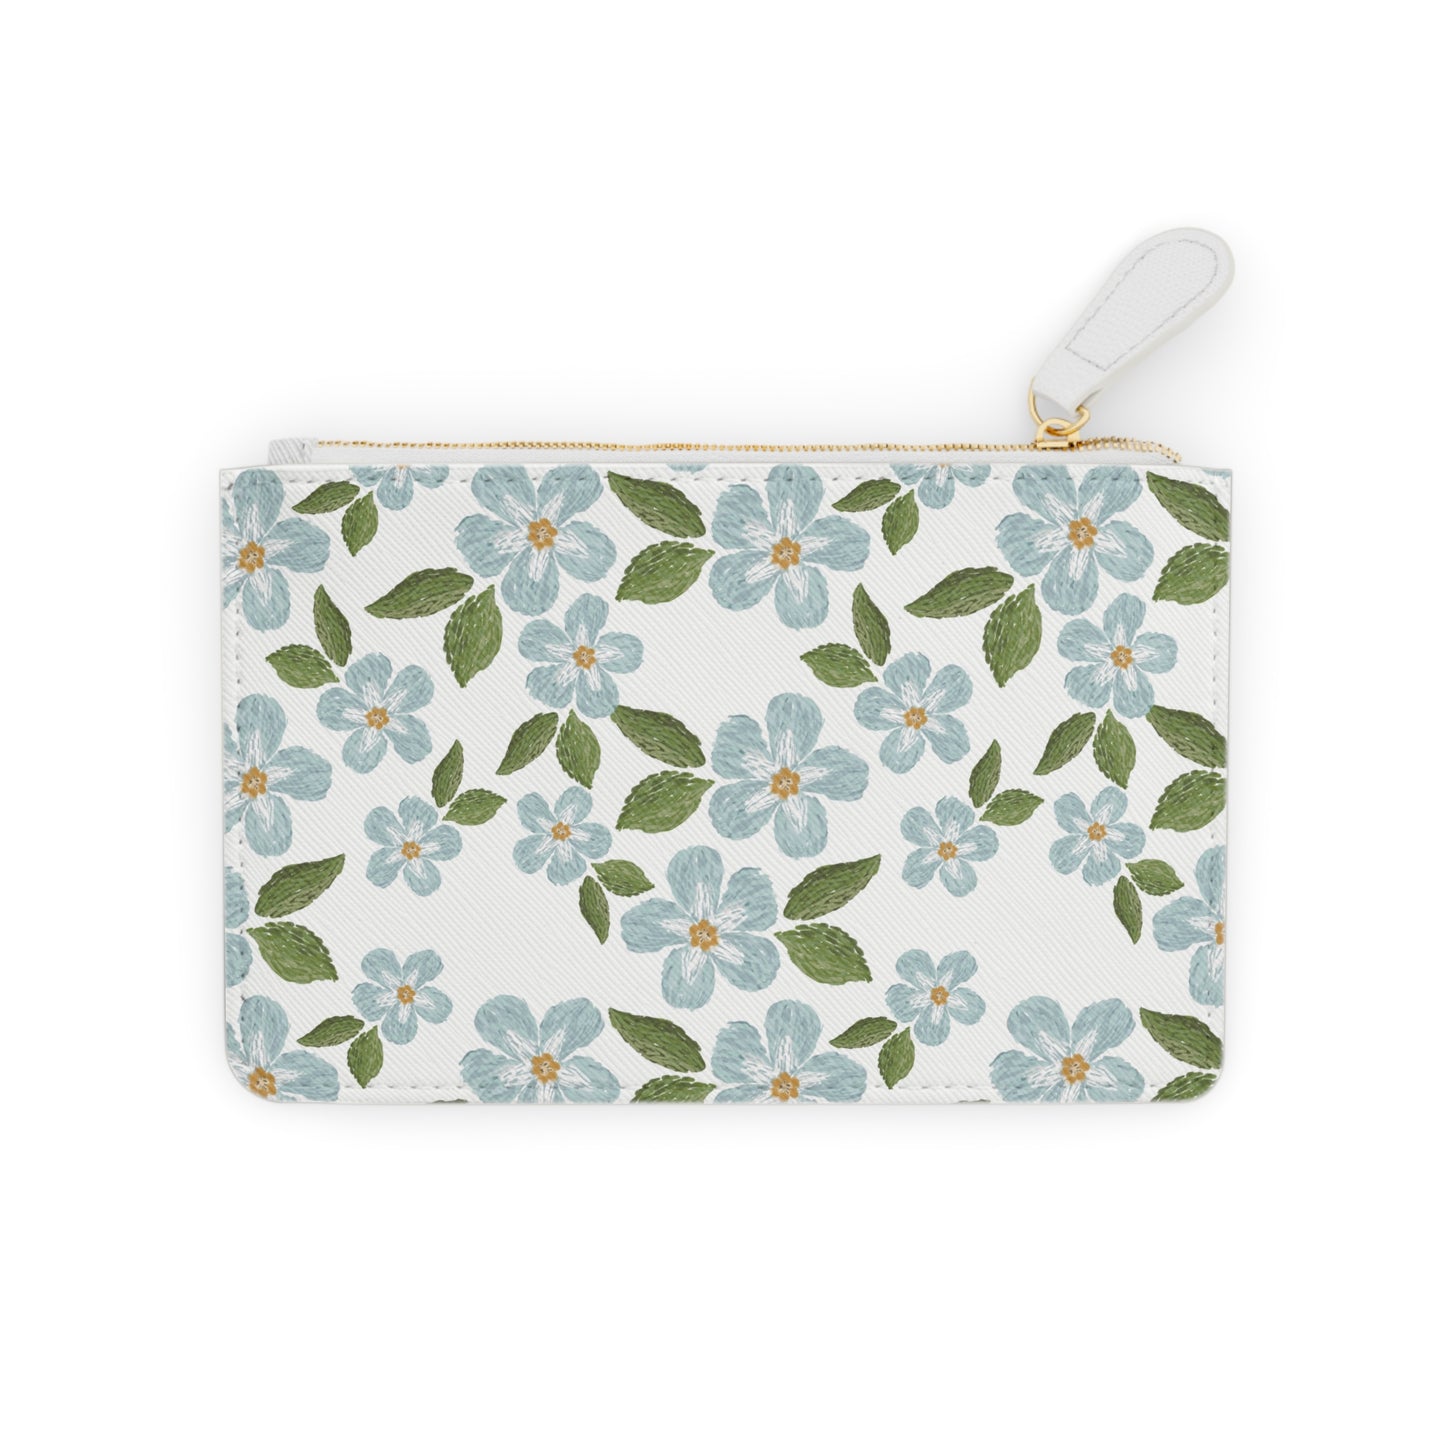 "Embroidery" Forget Me Not Clutch